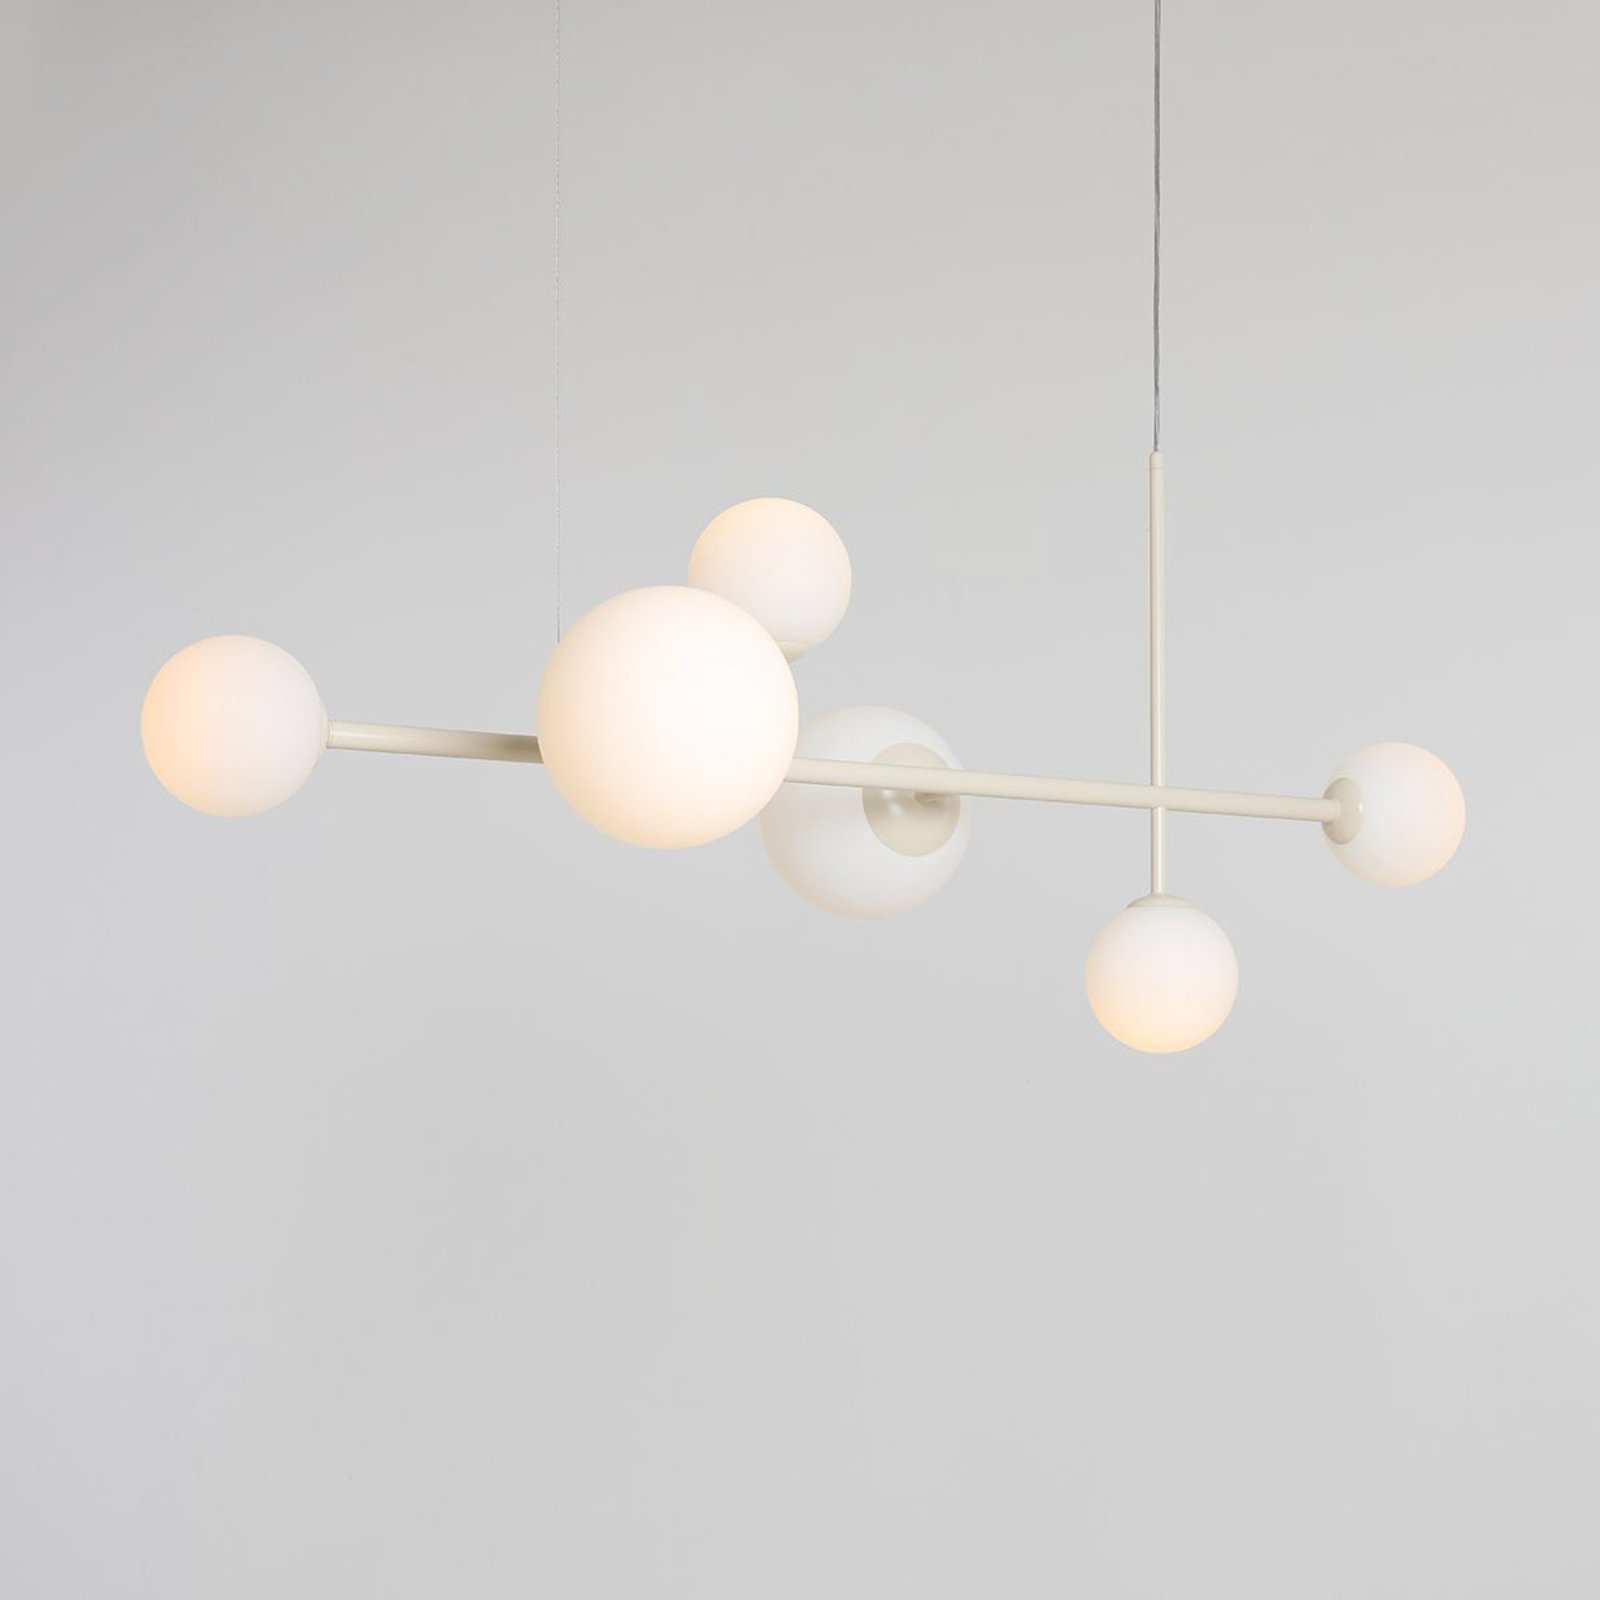 Hanglamp Dione, opaal/crème, 6-lamps